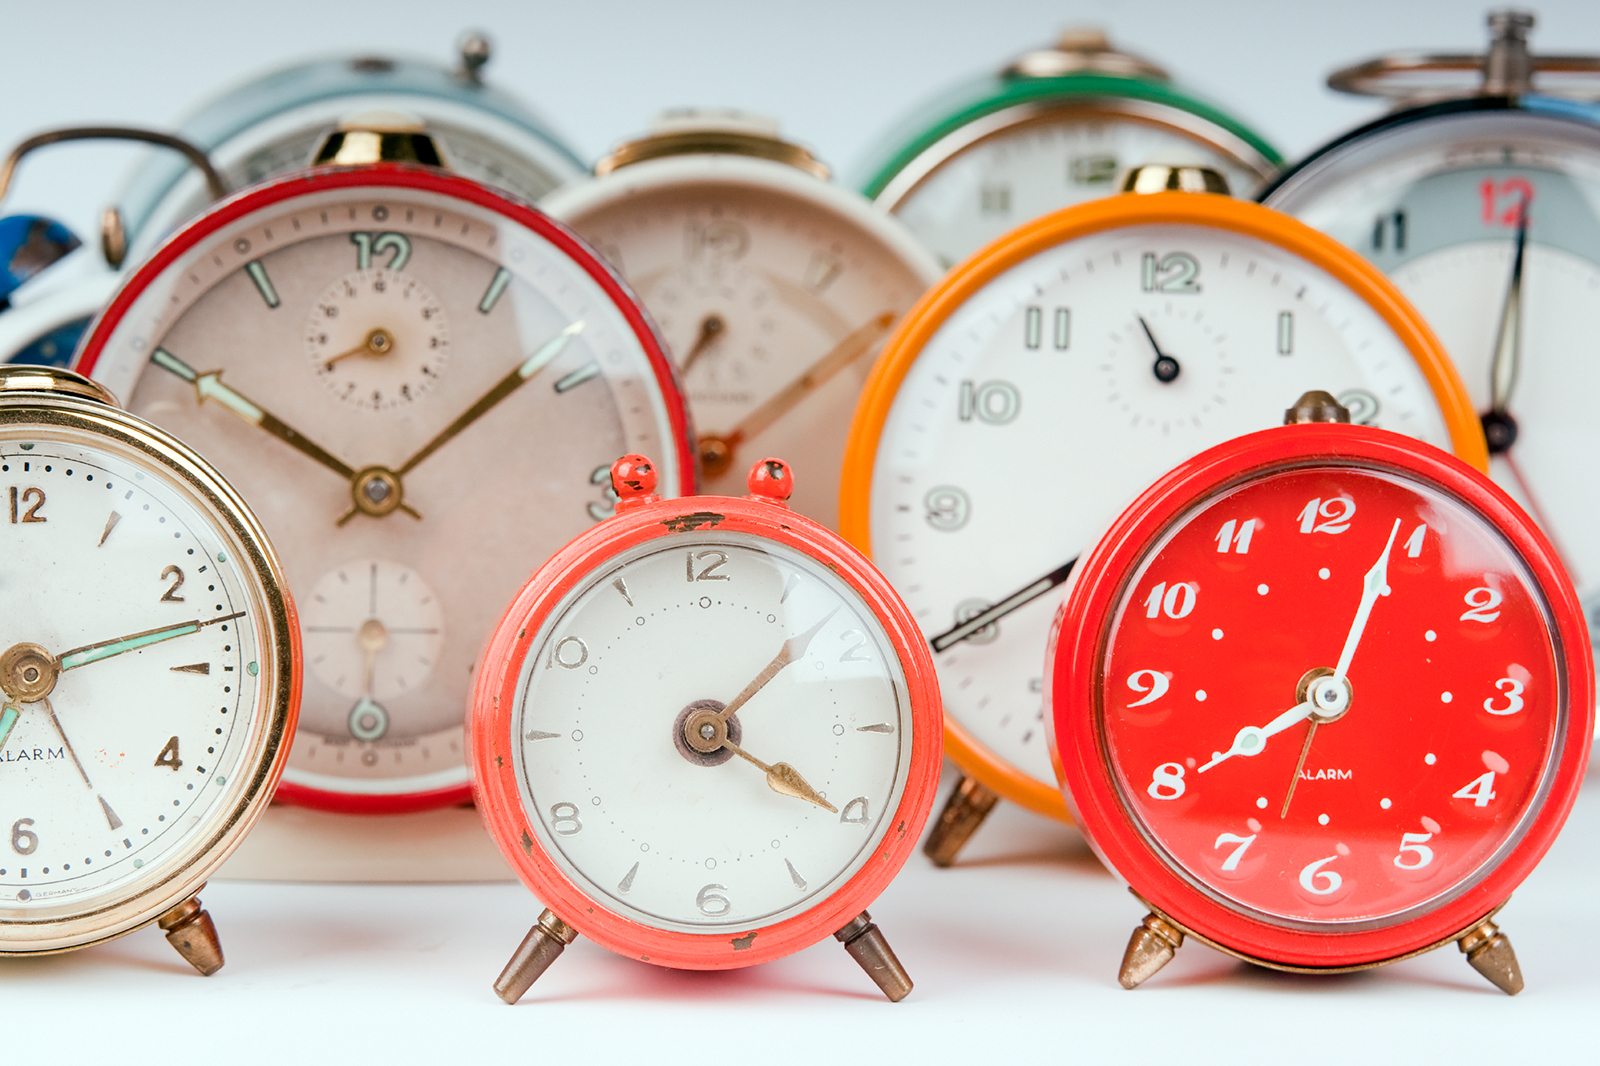 It's About Time - Words on Clock Remind of Deadline Stock Photo by